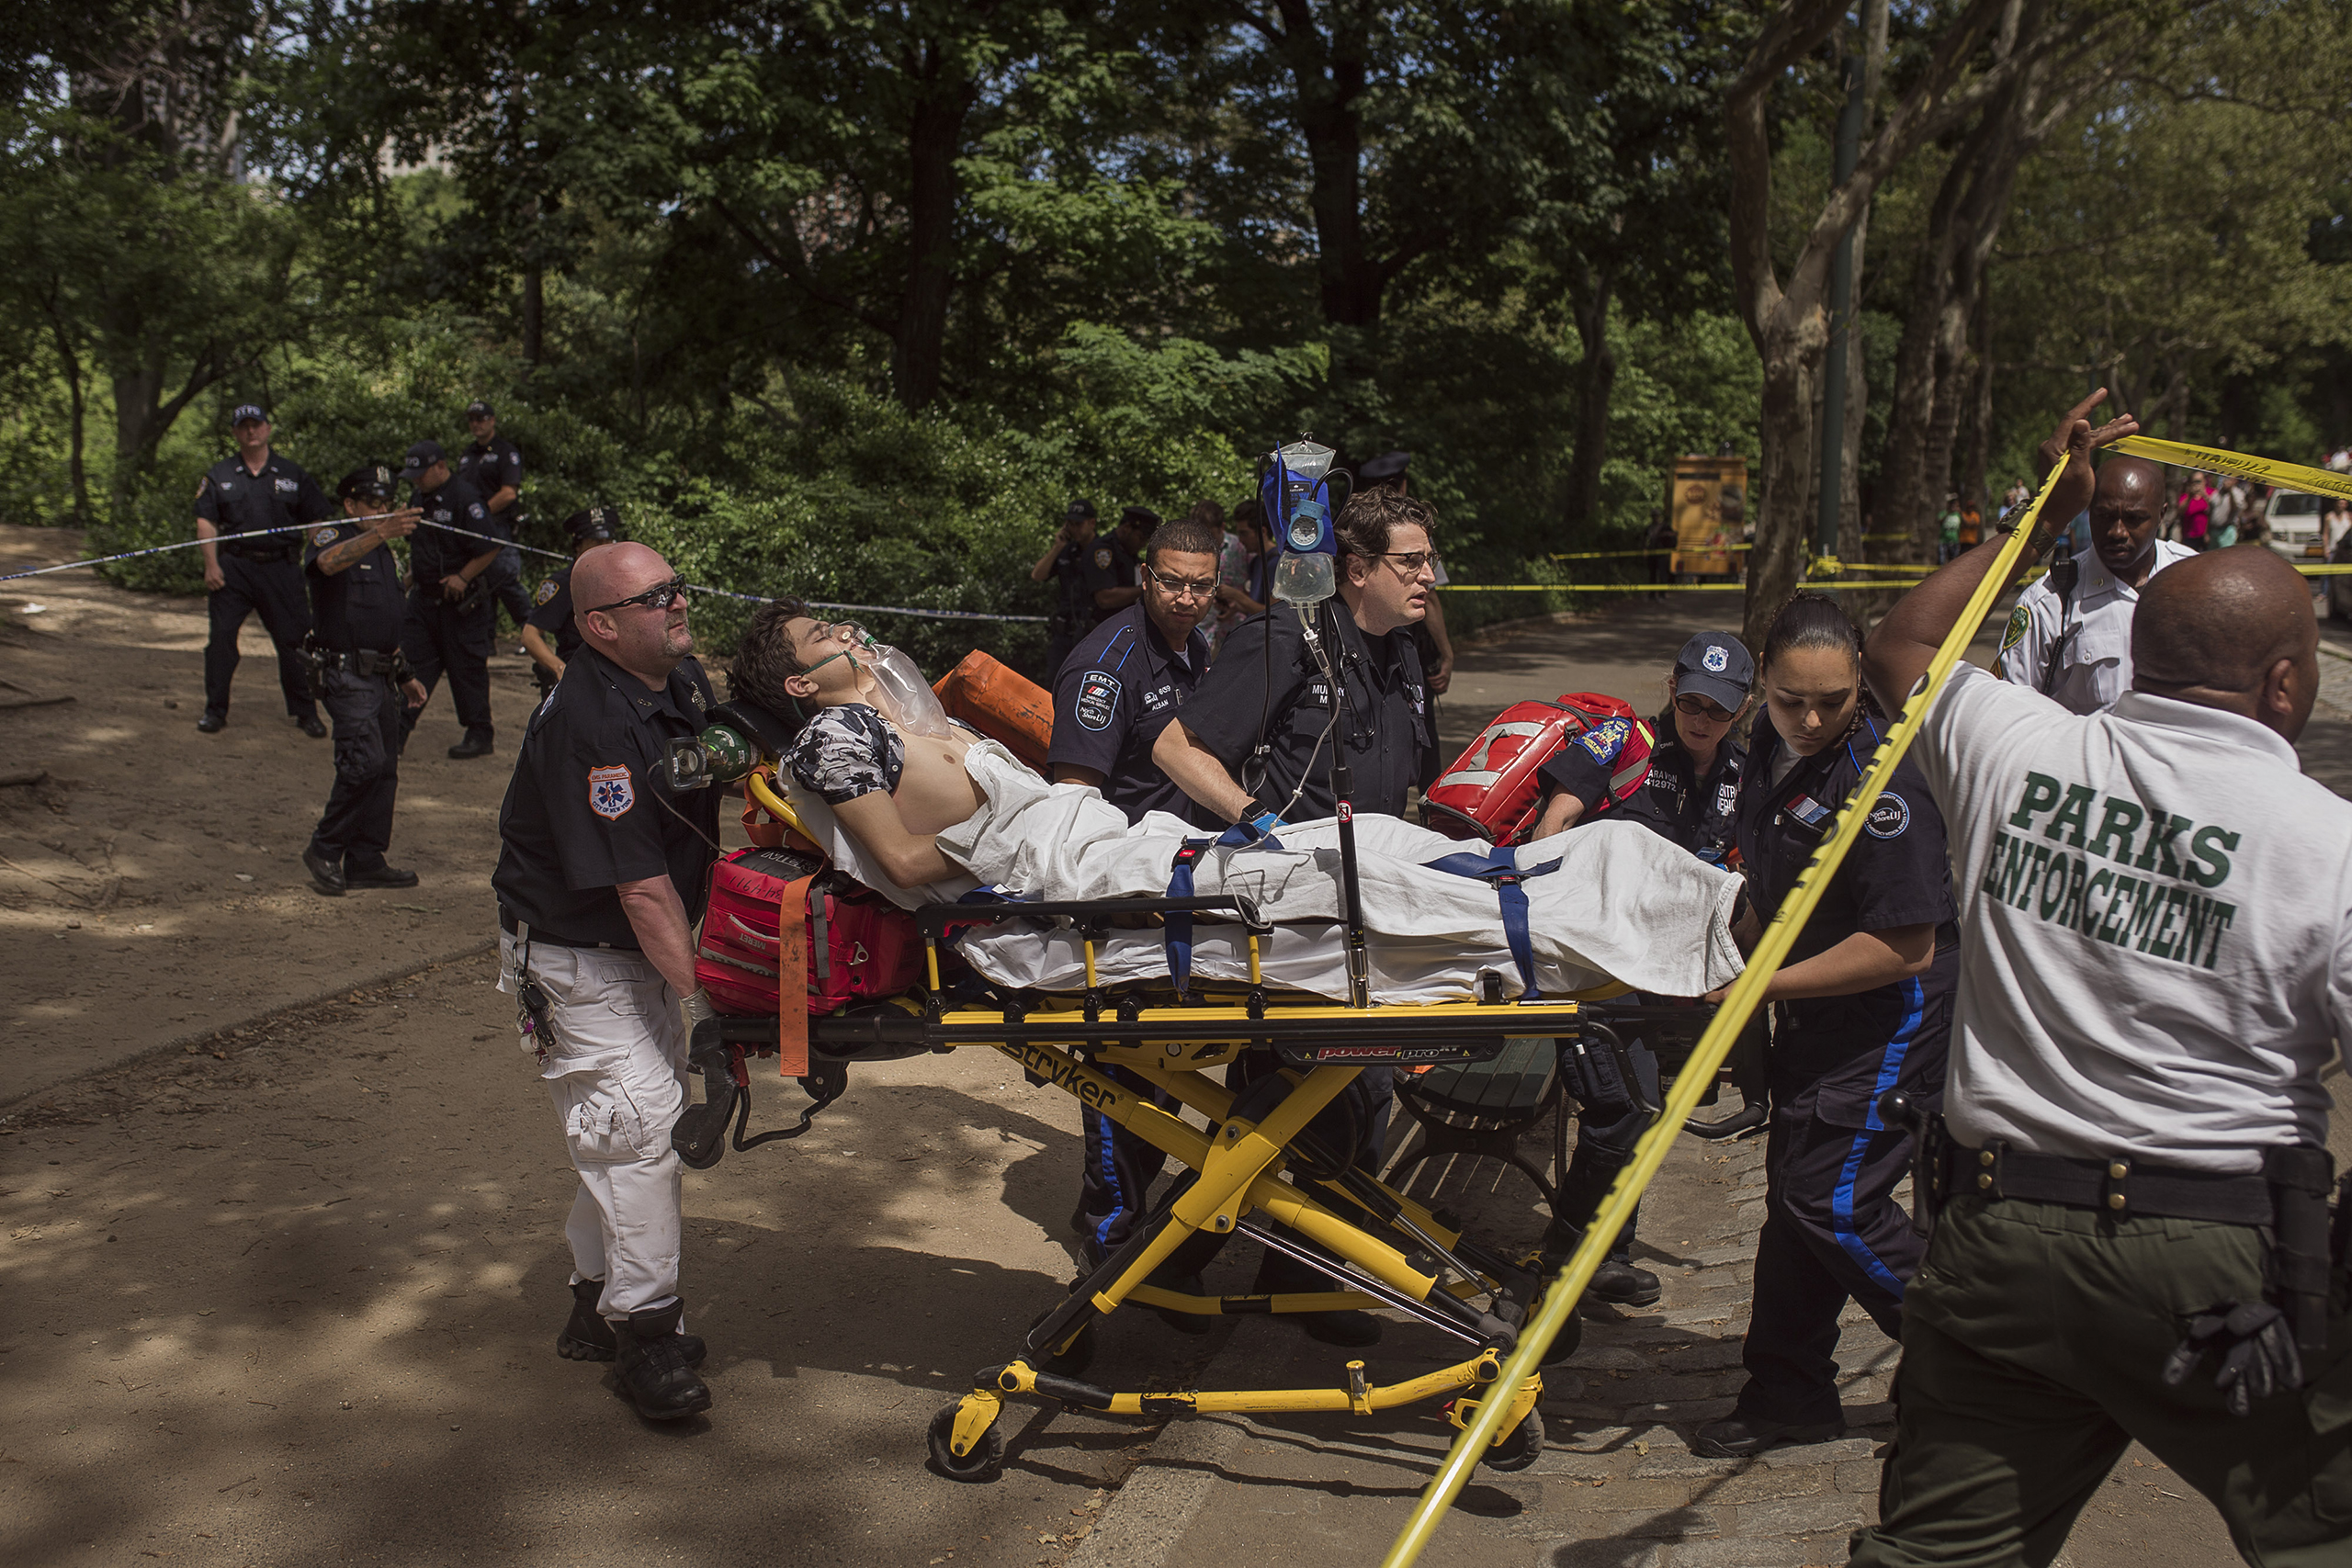 A injured man is carried to an ambulance in Central Park in New York City on July 3, 2016. (Andres Kudacki—AP)